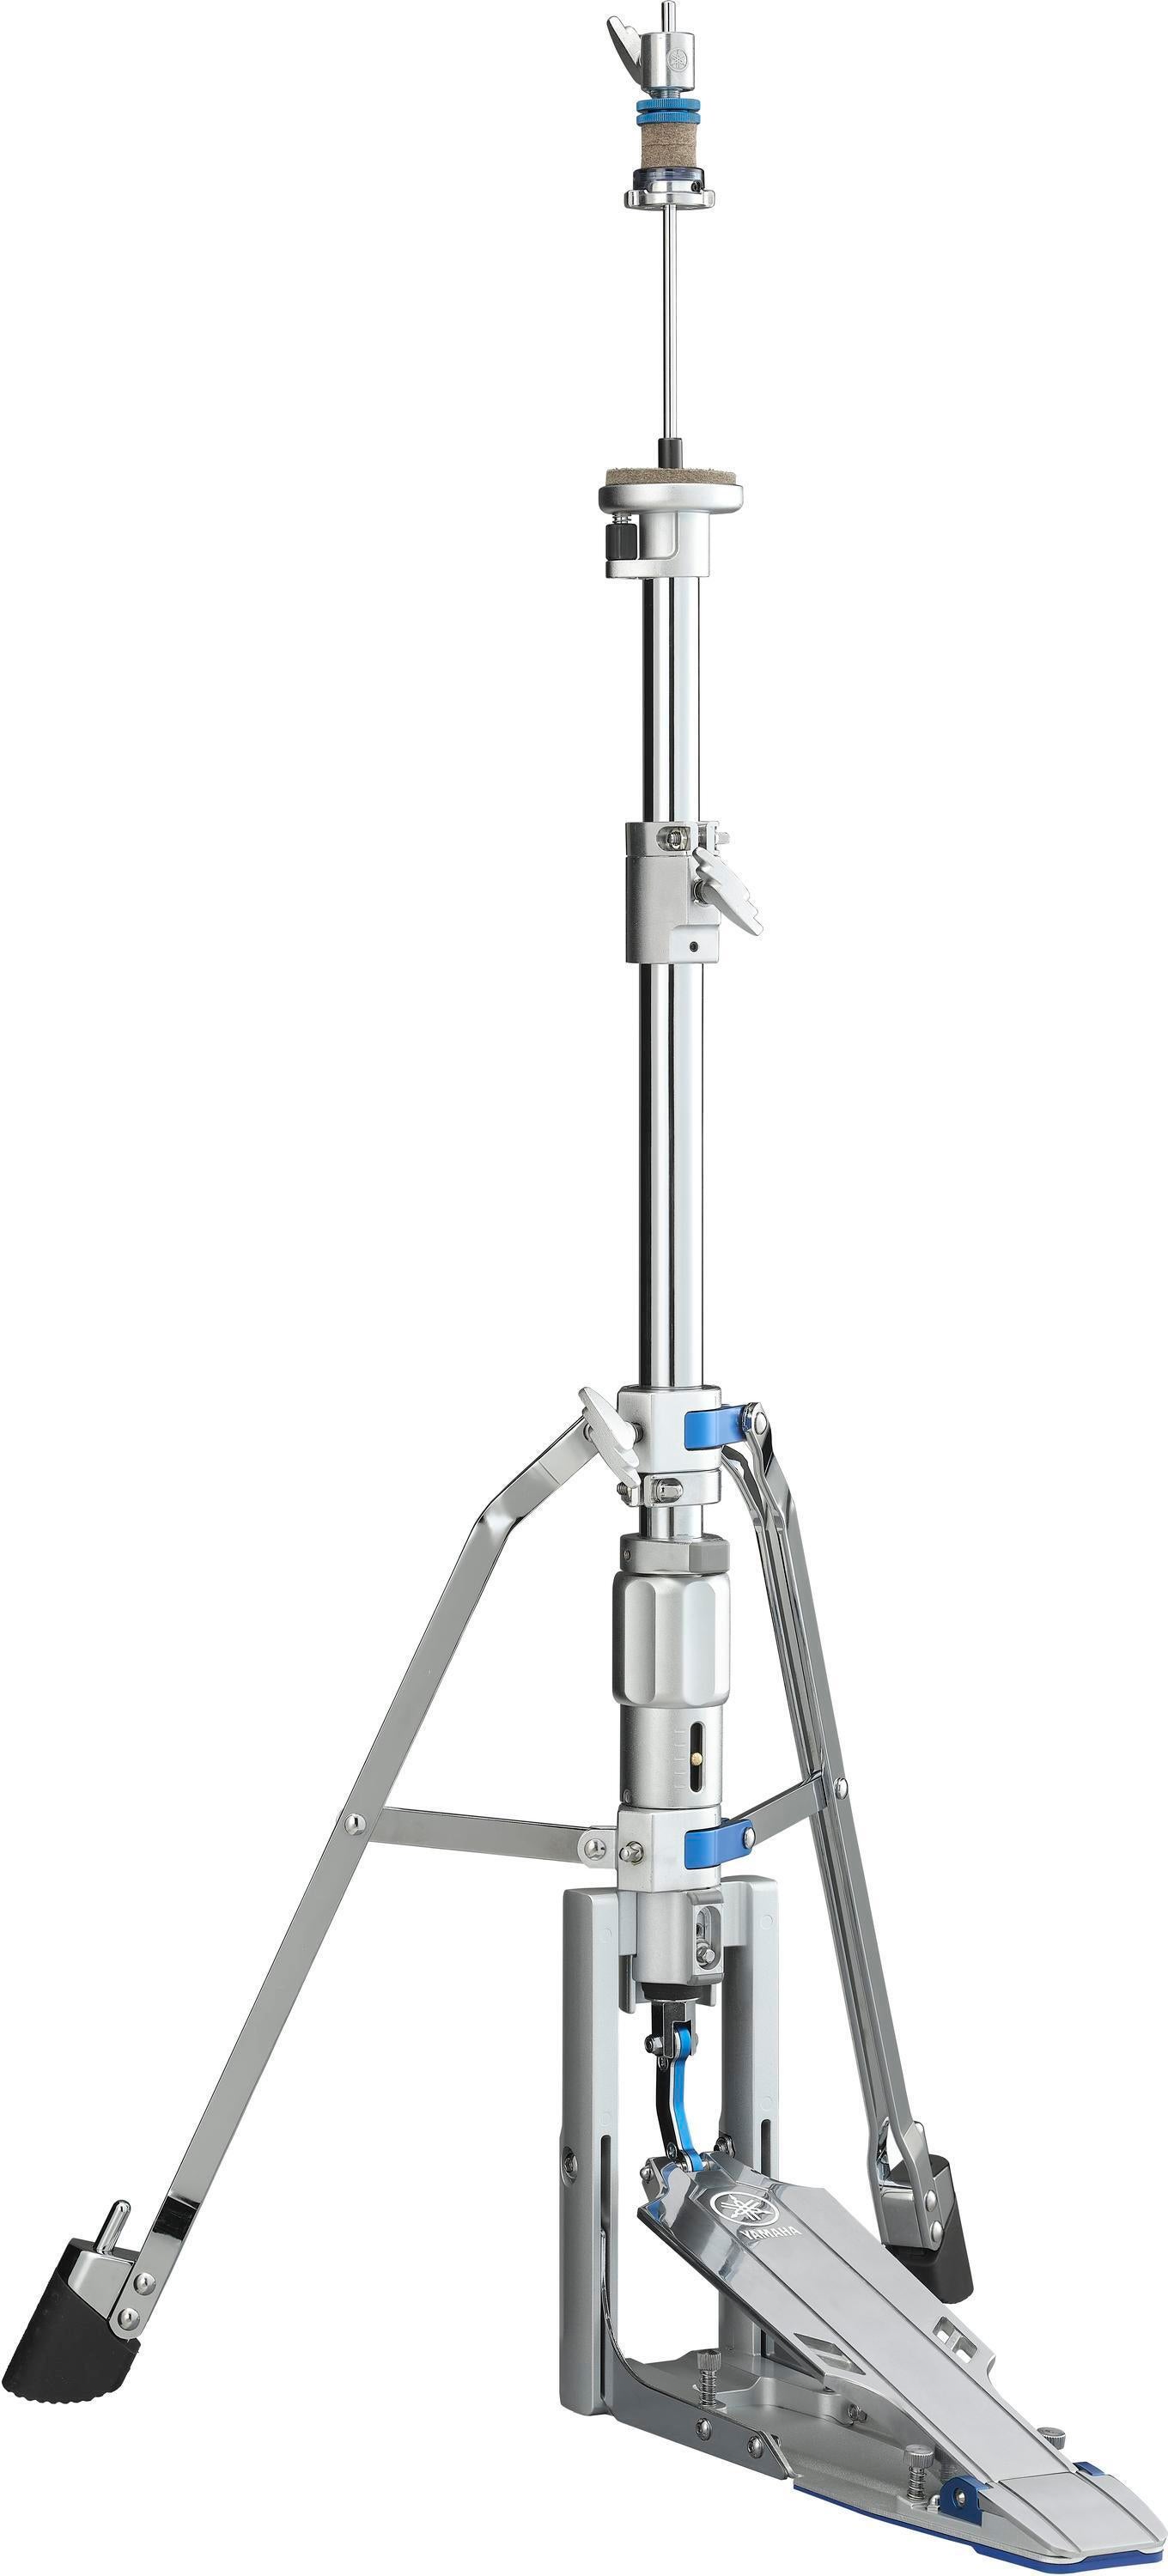 Yamaha HHS9D Hi-hat Stand | Sweetwater